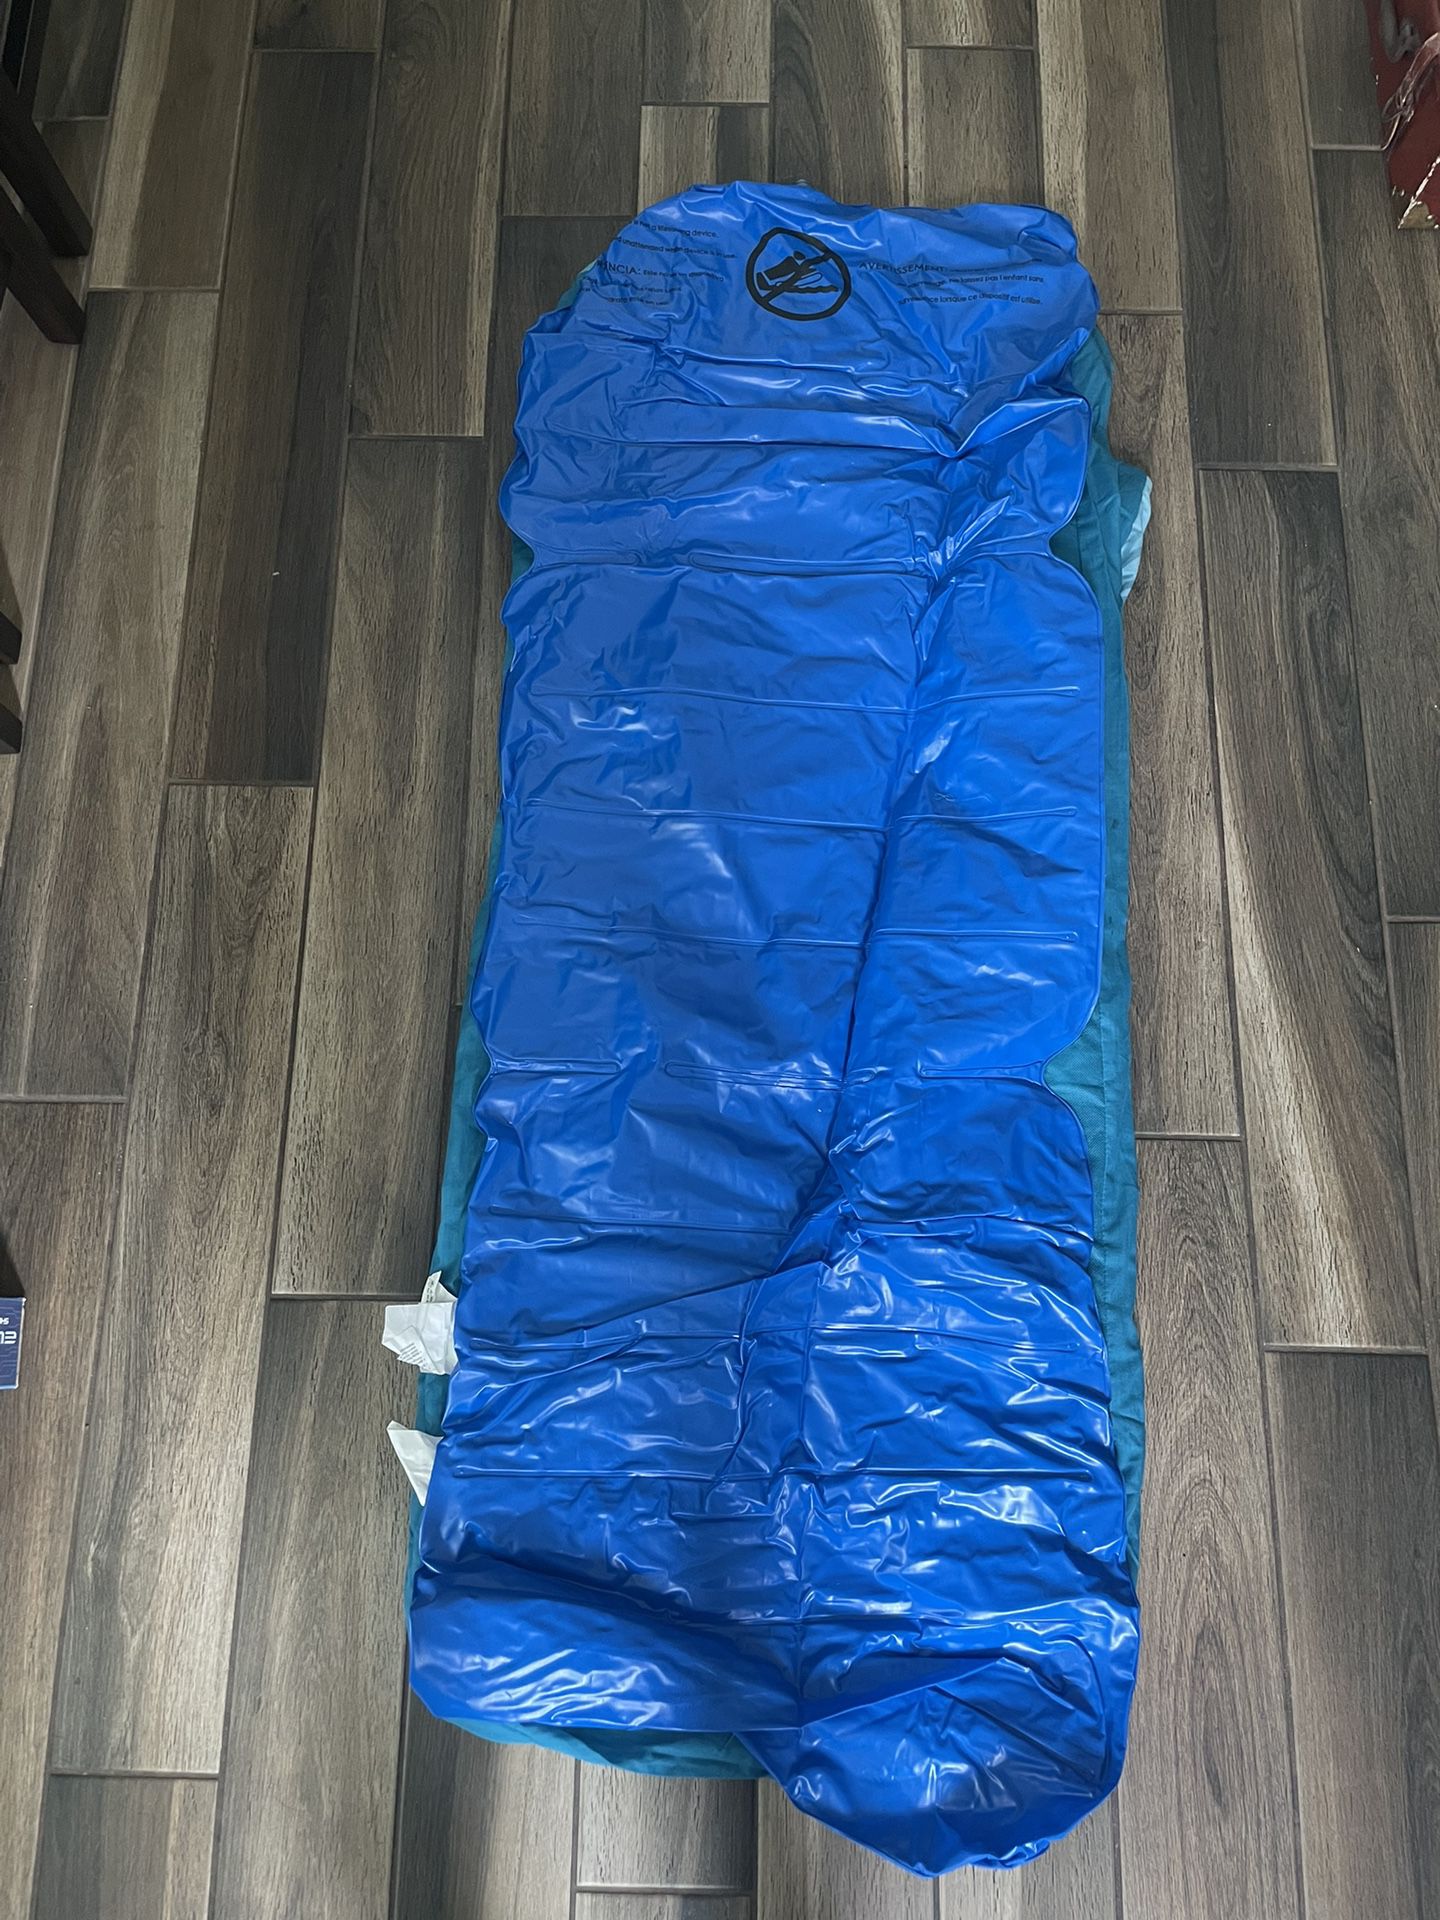 ReadyBed Junior Hearts Inflatable Sleeping Bag for Sale in Queen Creek, AZ  - OfferUp